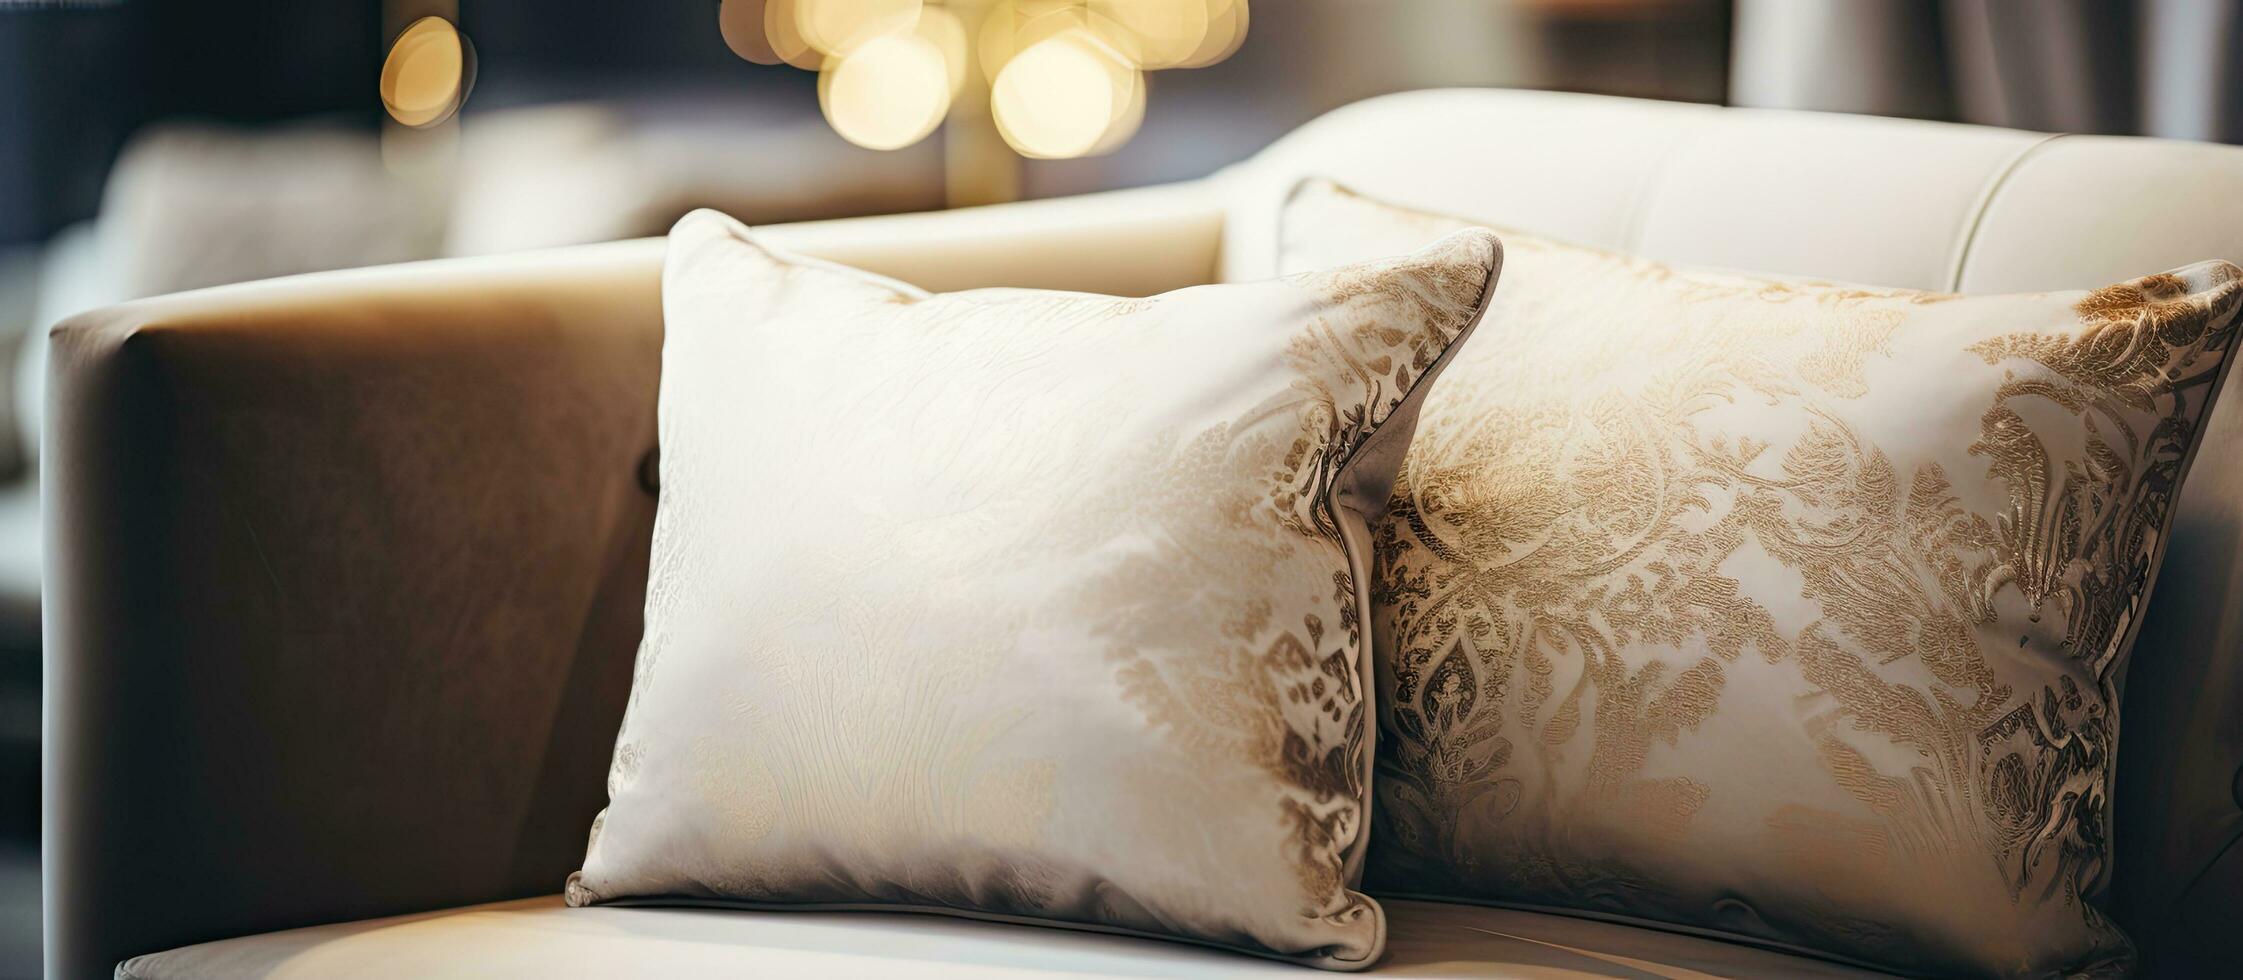 Vintage light filter enhances the aesthetic of a luxurious pillow on a sofa in the living room interior photo